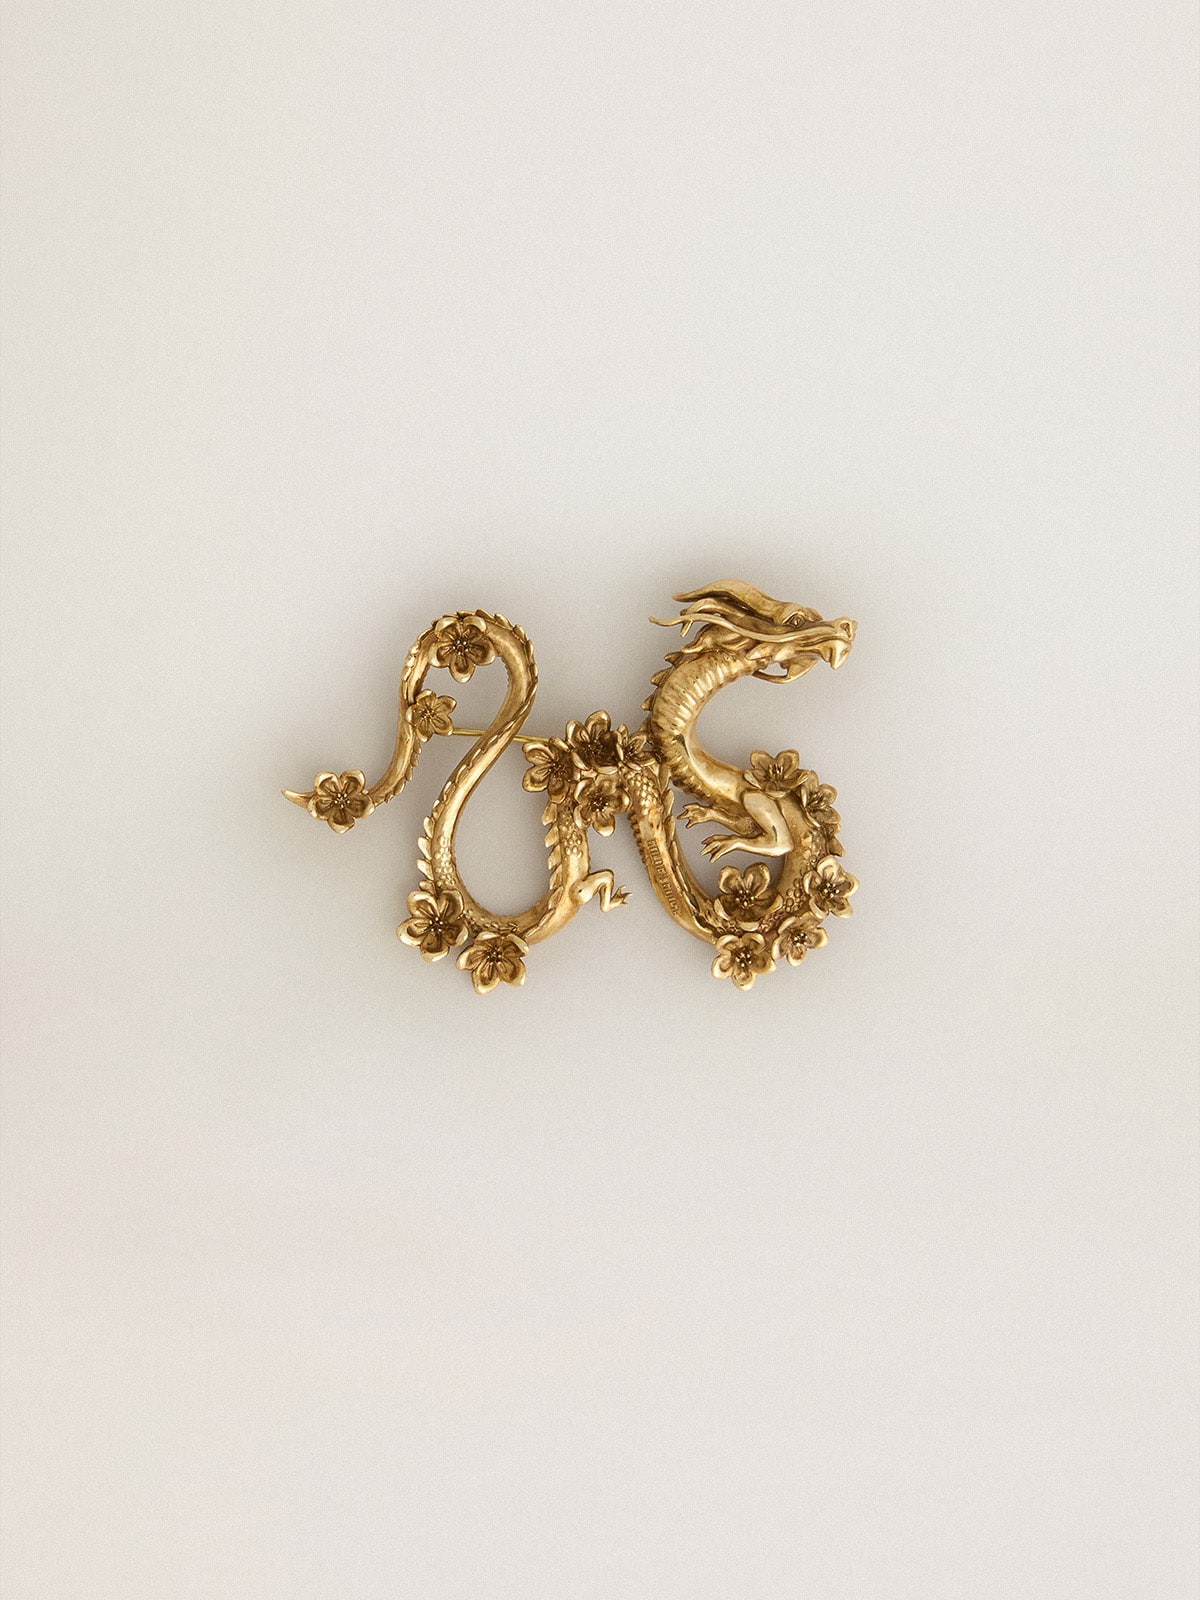 Golden Goose - CNY antique gold dragon-shaped pin in 